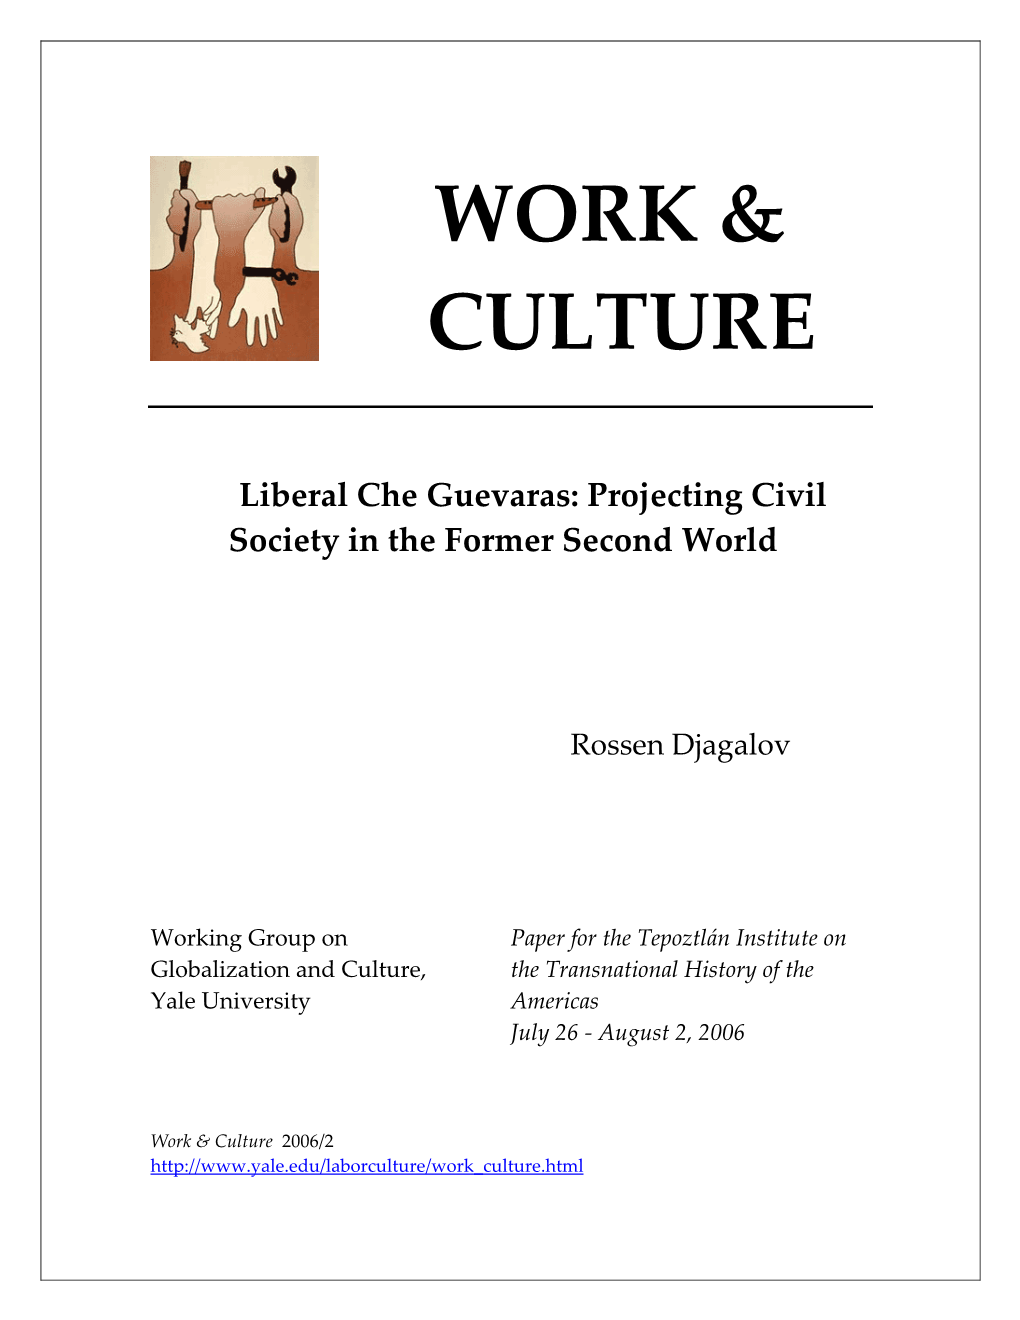 Liberal Che Guevaras: Projecting Civil Society in the Former Second World